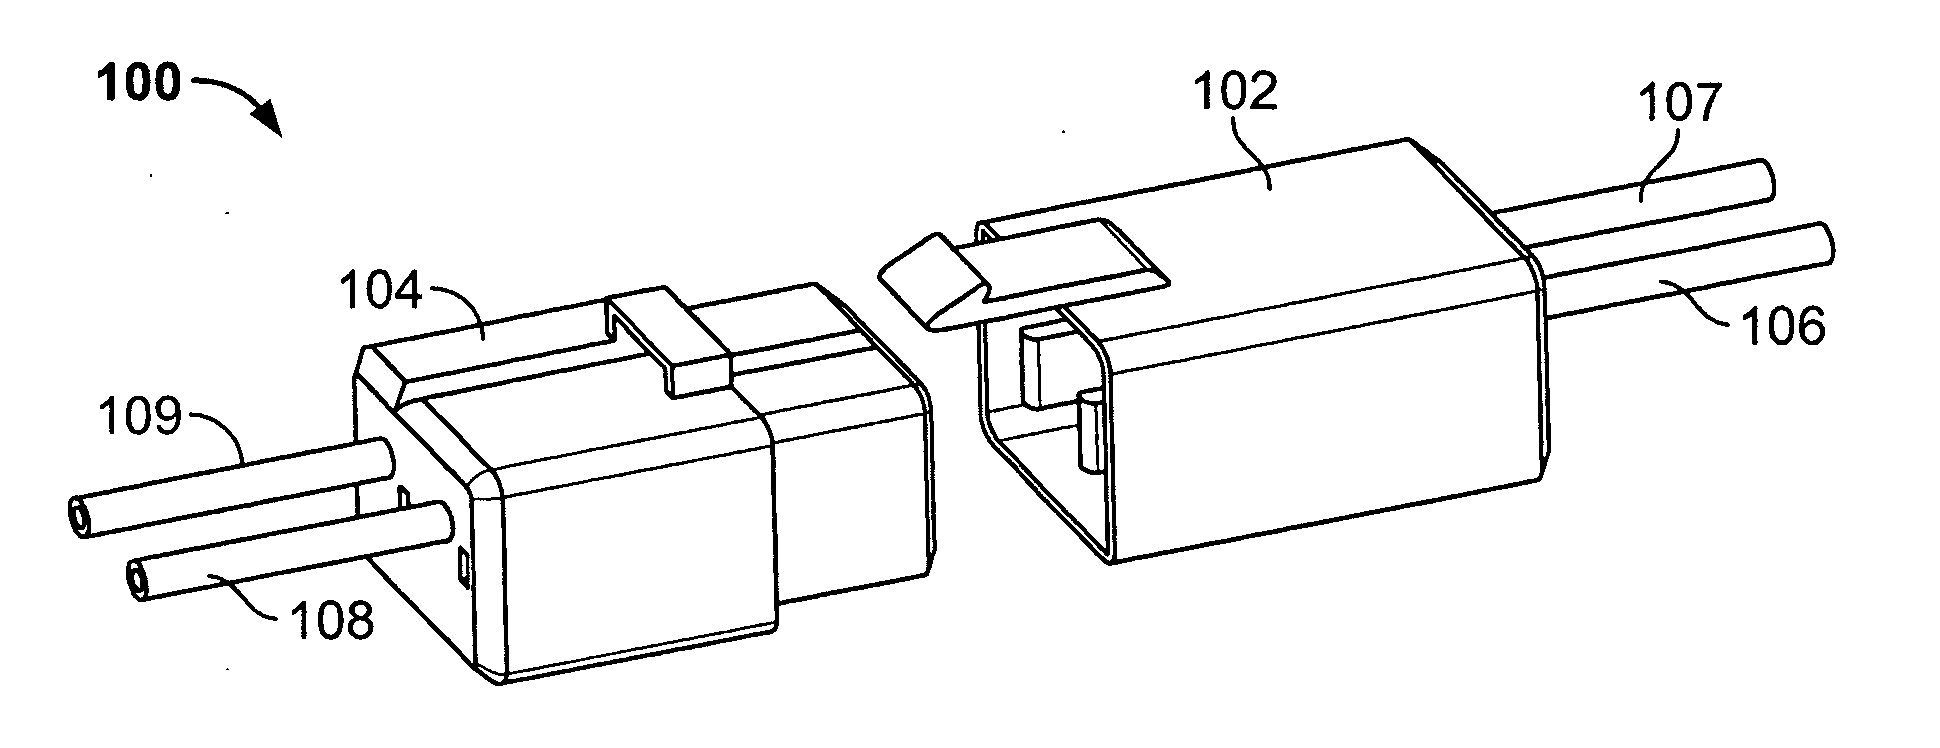 Hot plug wire contact and connector assembly